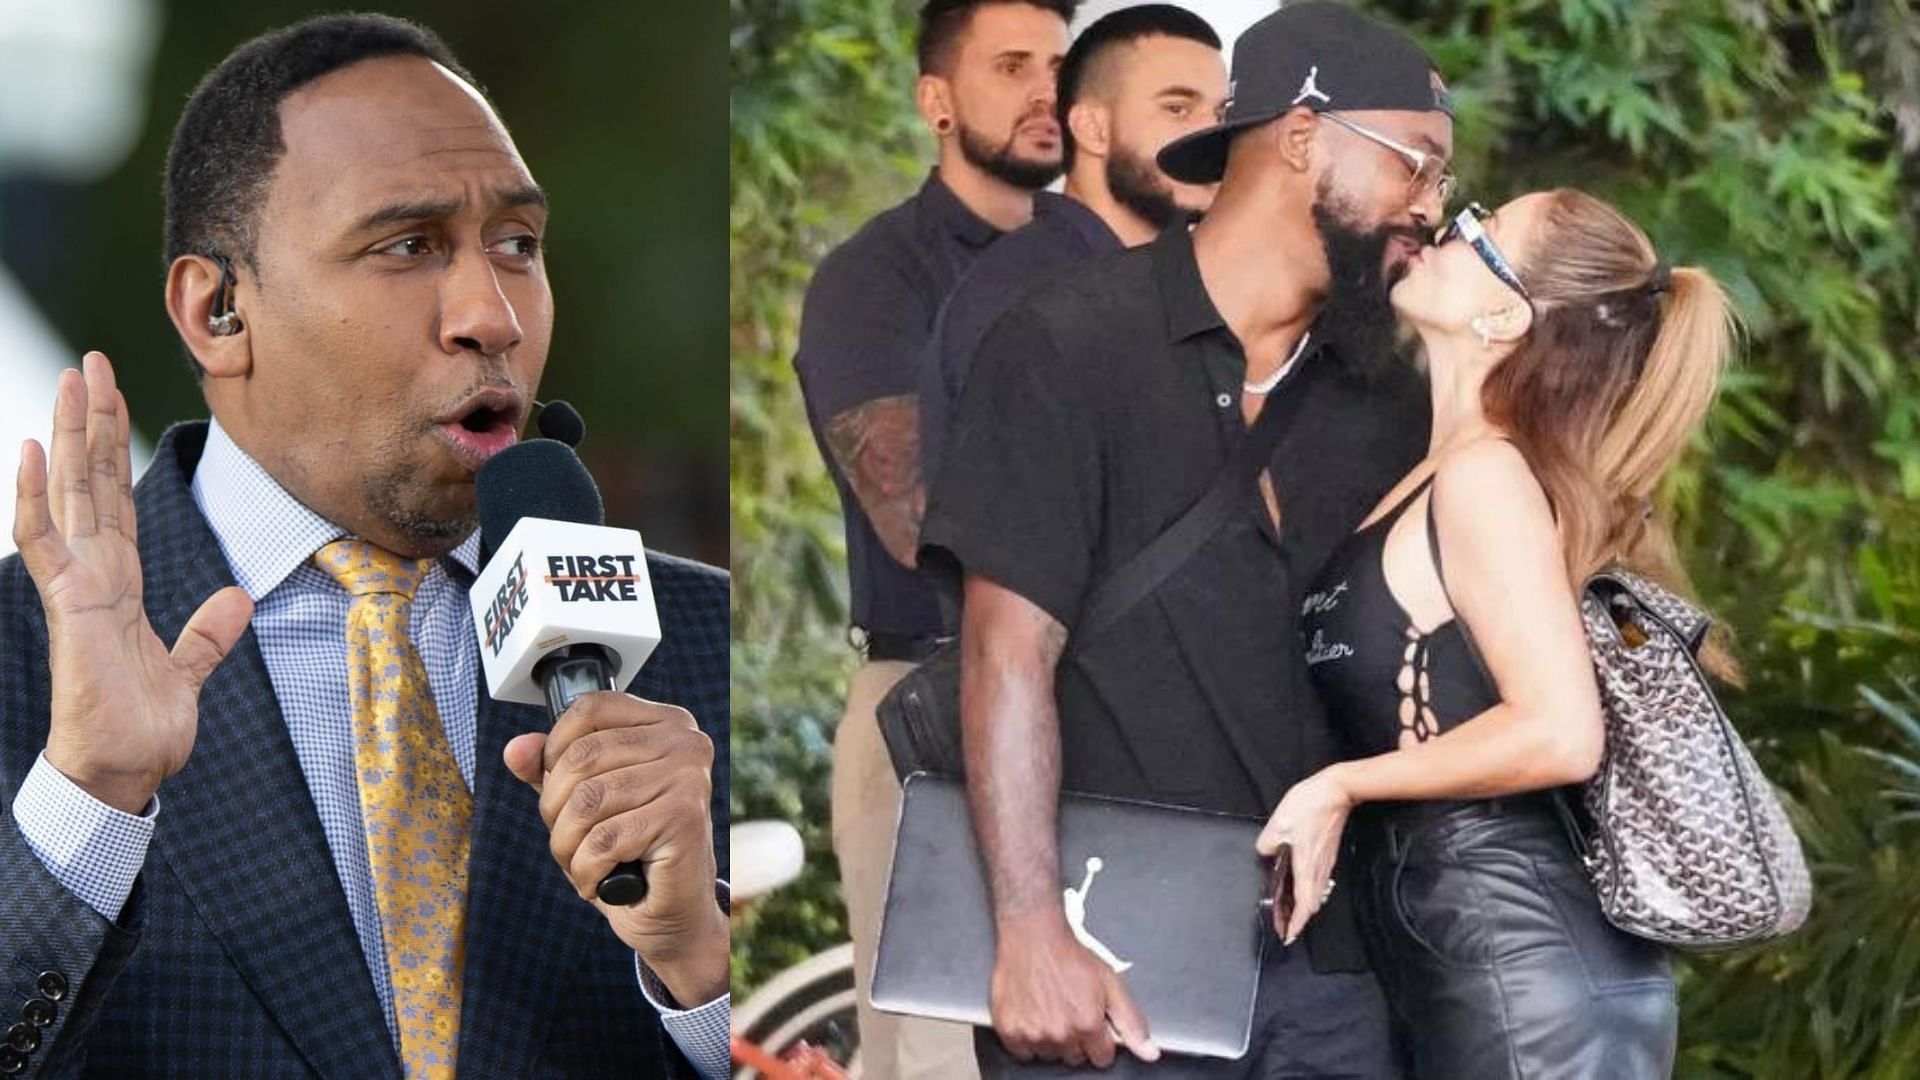 Stephen A. Smith said he understands why Marcus Jordan would want to settle down with the former Larsa Pippen despite their 17-year gap.